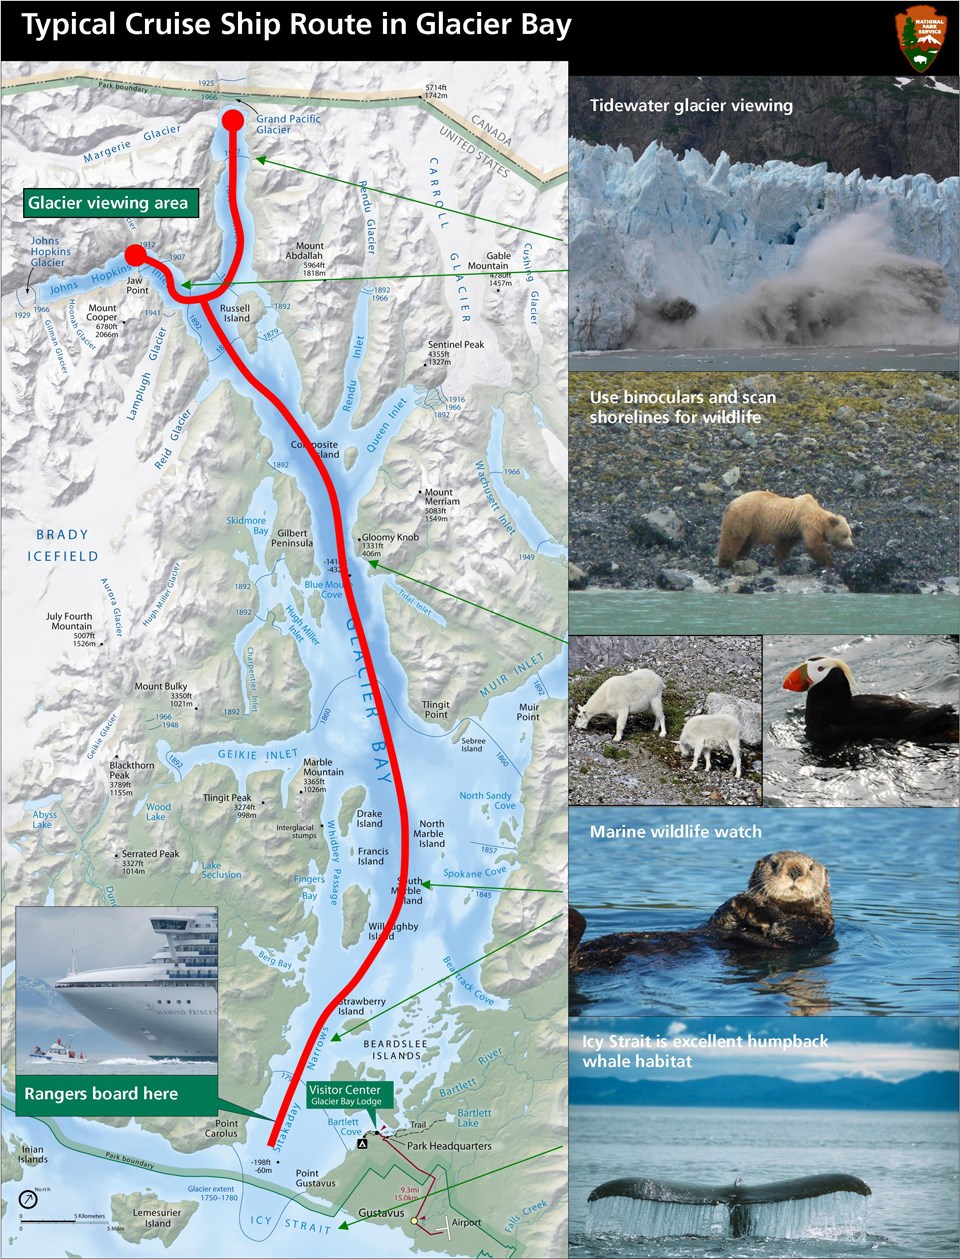 Graphical map showing photos and typical Cruise Ship Route in Glacier Bay